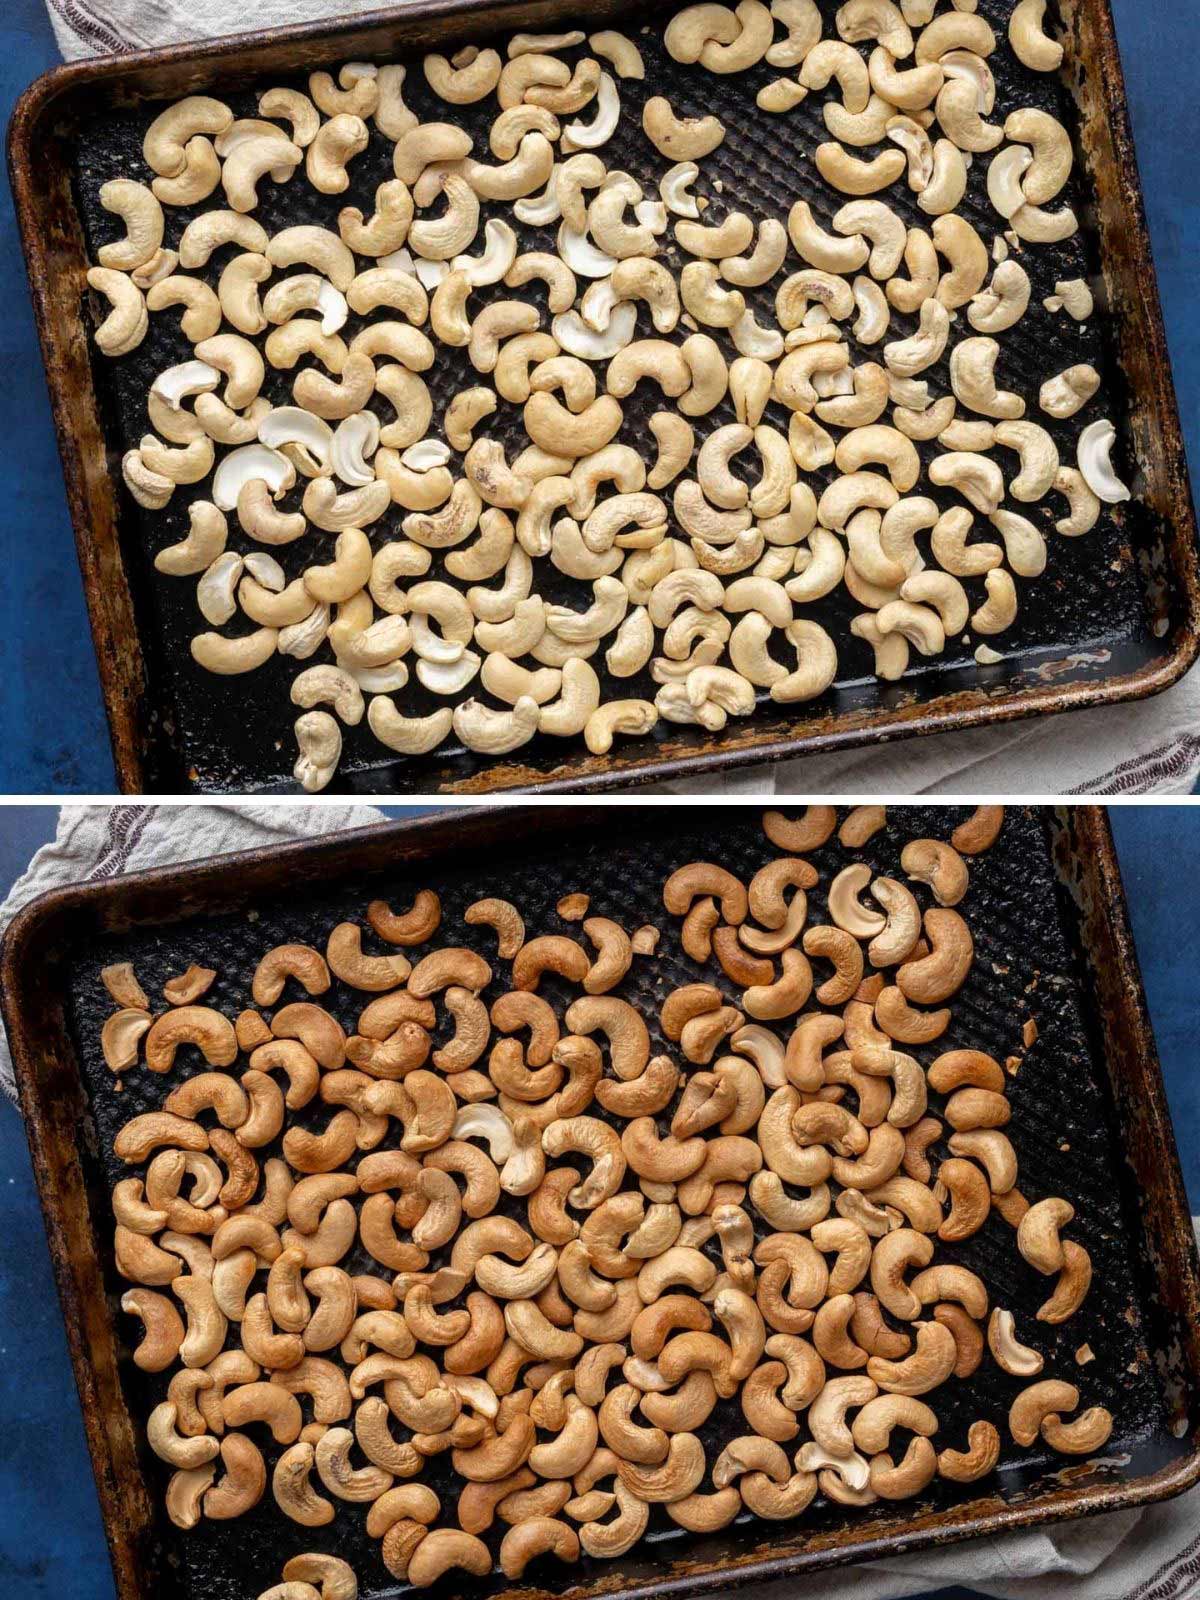 Whole cashews before and after roasting.